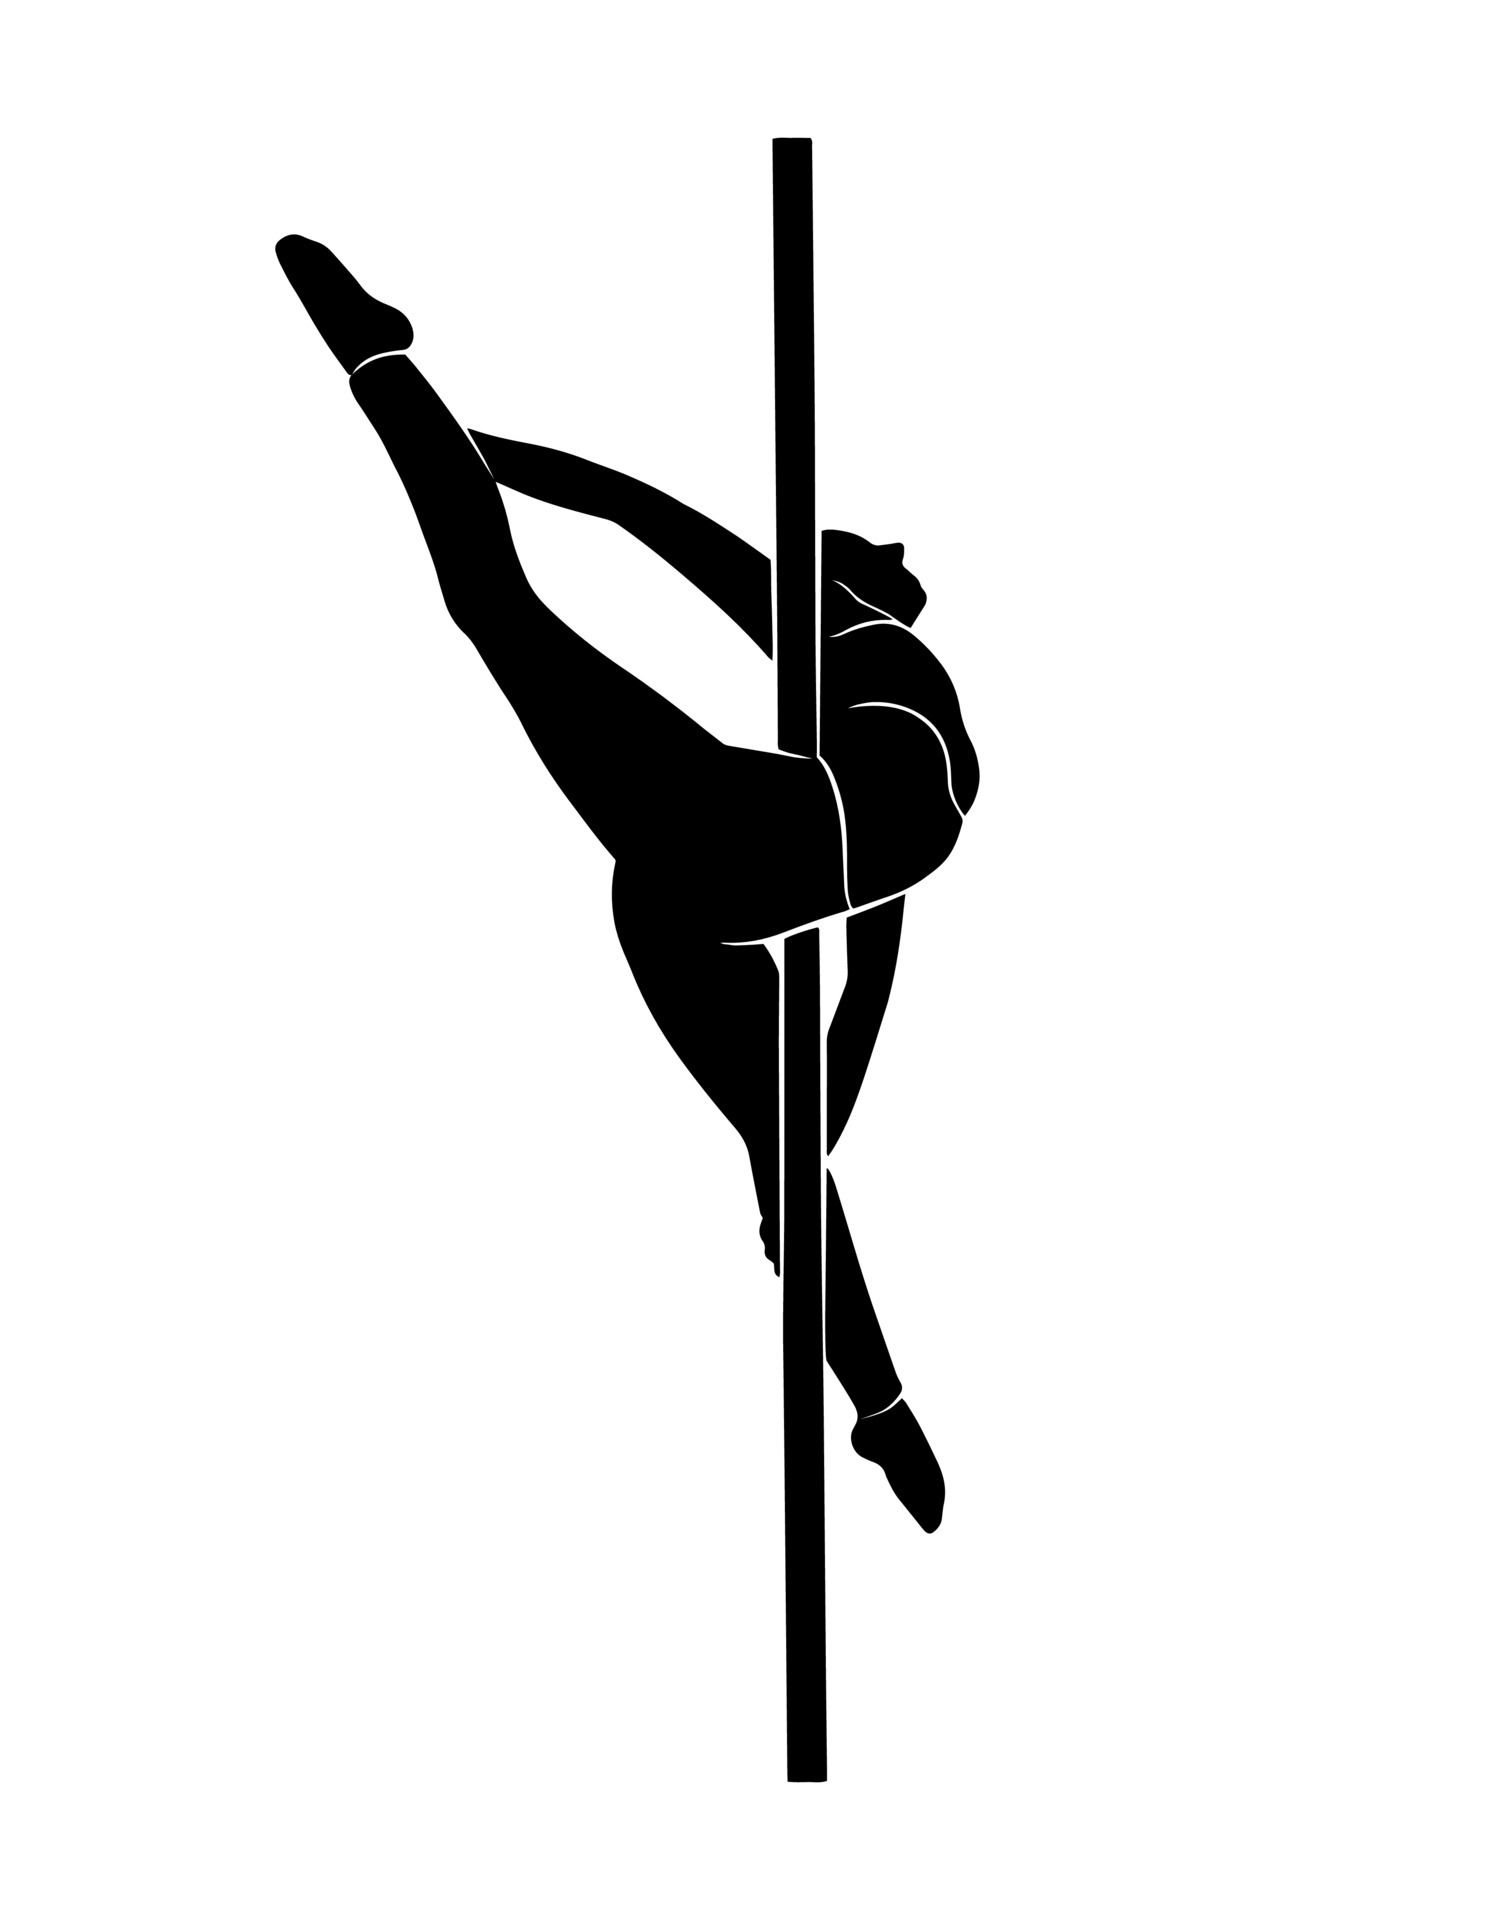 https://static.vecteezy.com/system/resources/previews/006/689/211/original/pole-dance-dancer-full-body-shape-isolated-shadow-simple-black-silhouette-icon-decoration-studio-pylon-sign-logo-design-graphic-sportive-position-fit-beautiful-elegant-lady-woman-drawing-vector.jpg